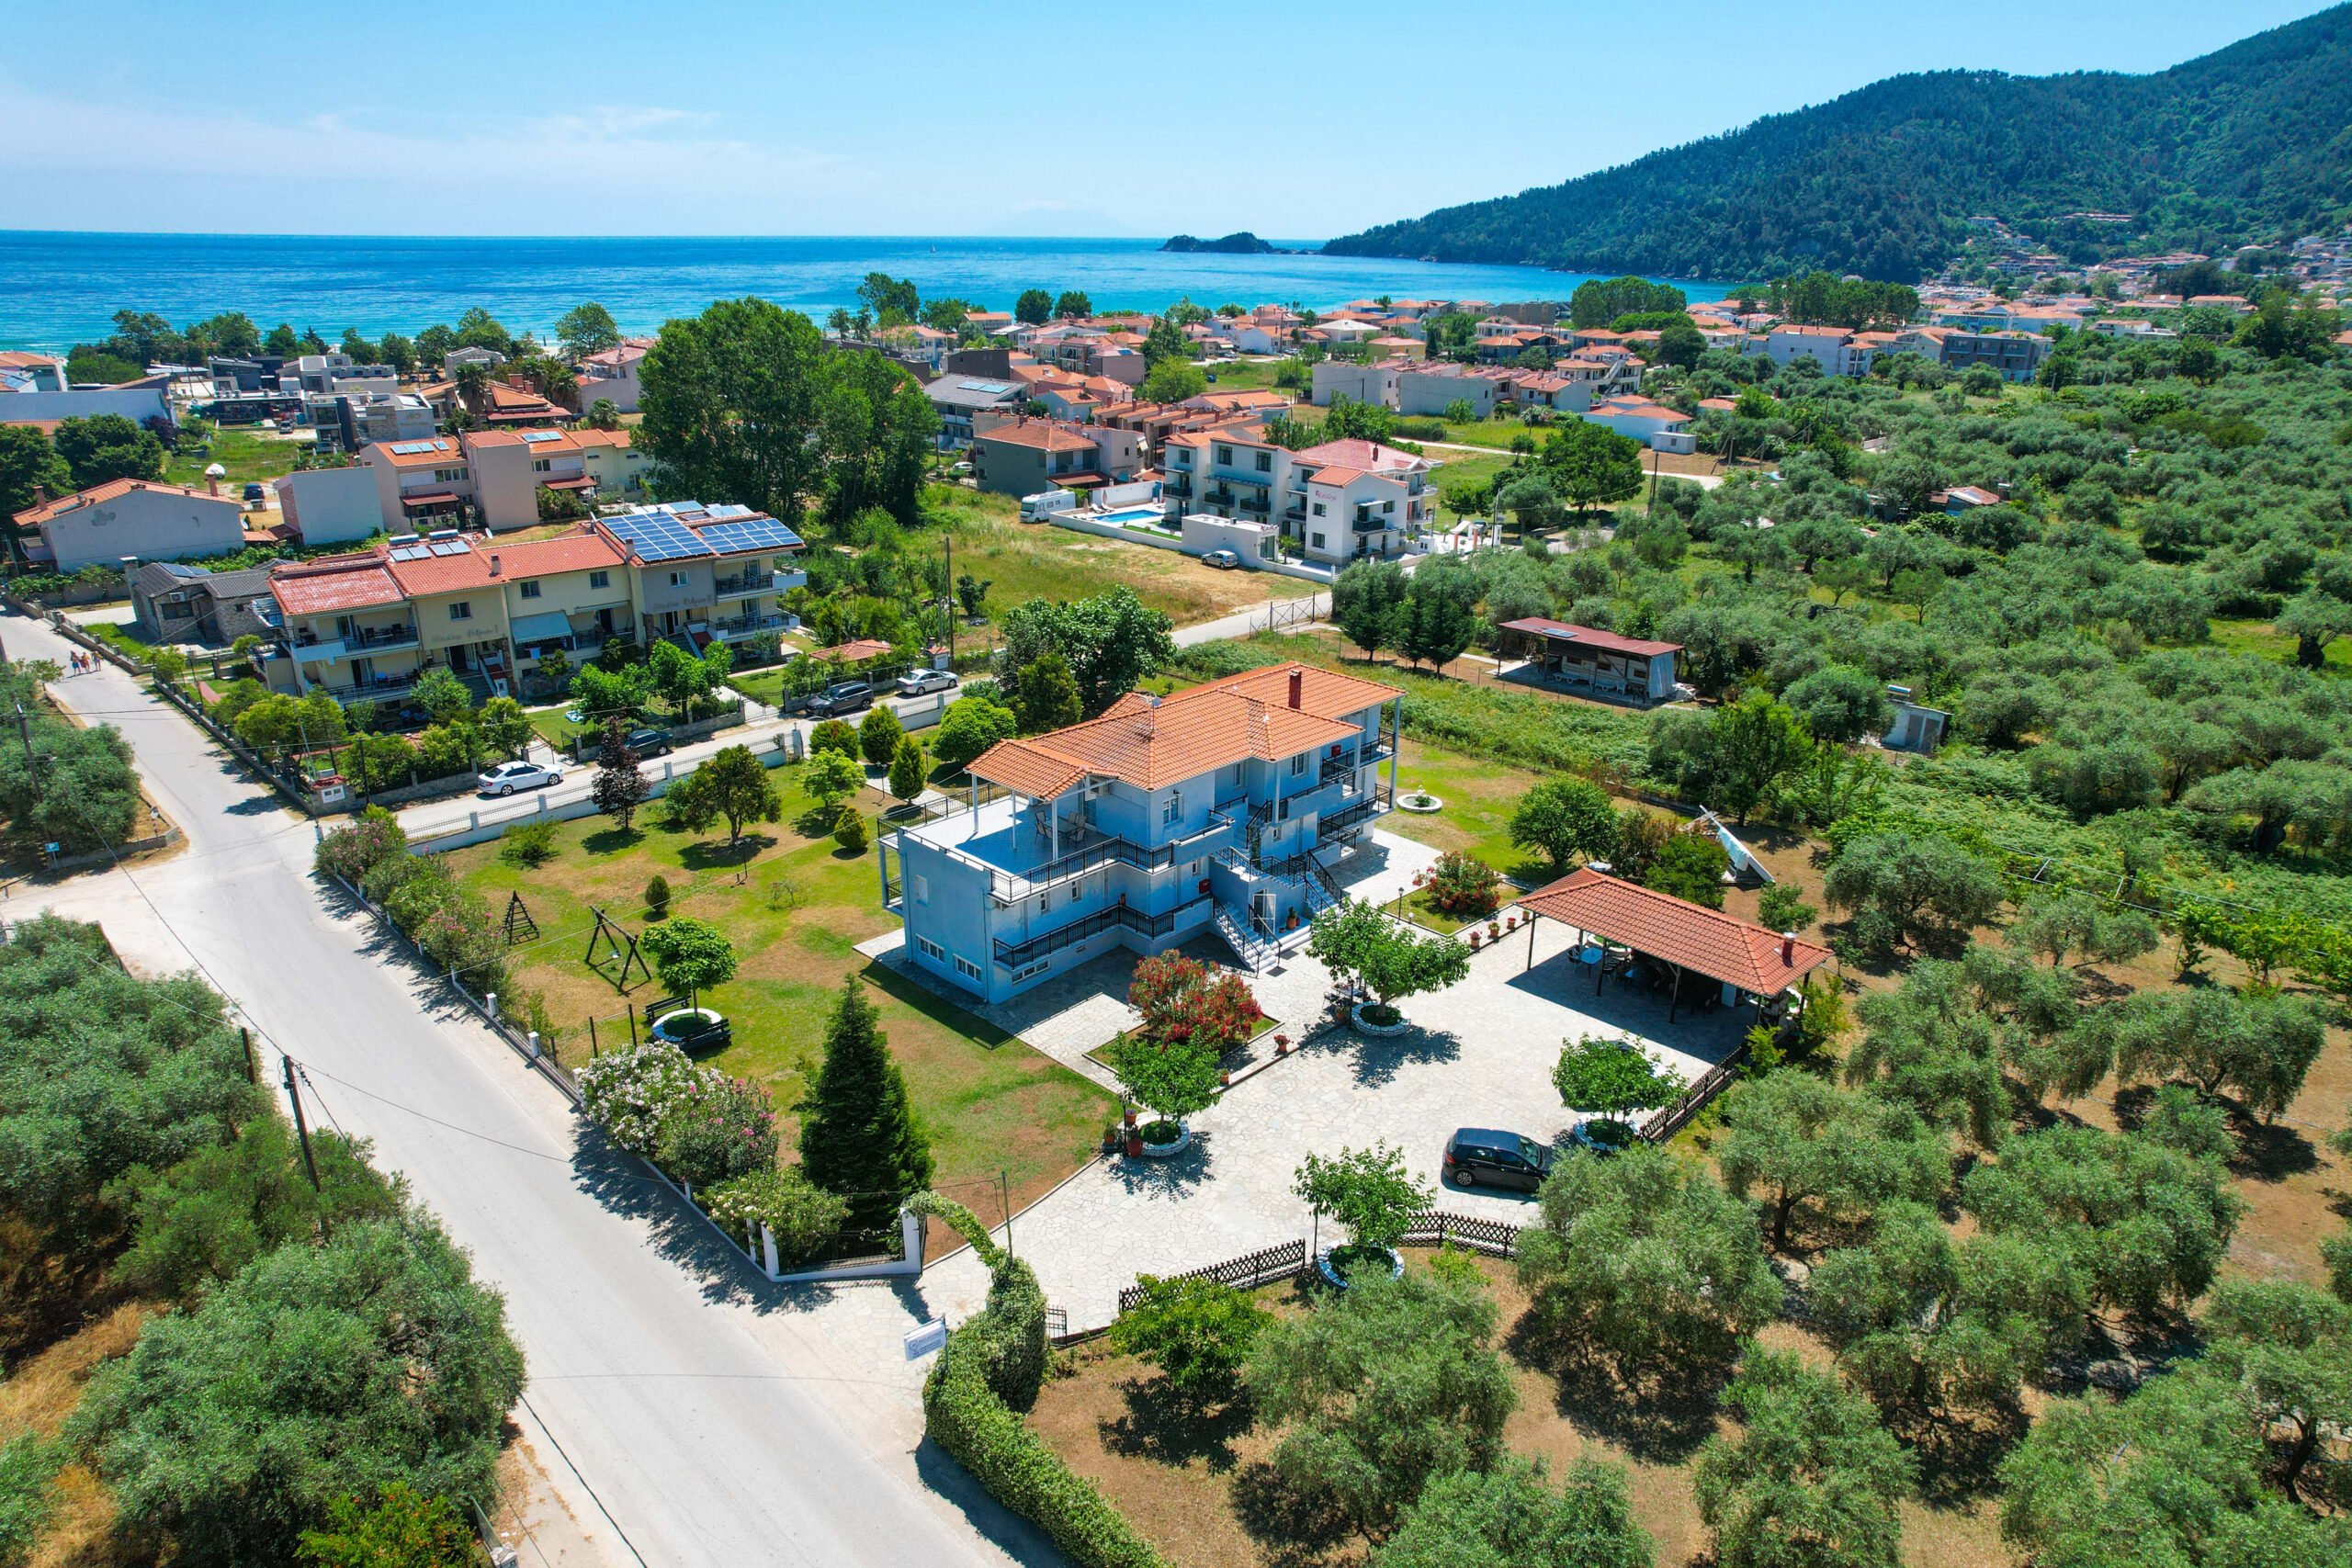 Hotels in Thassos Greece